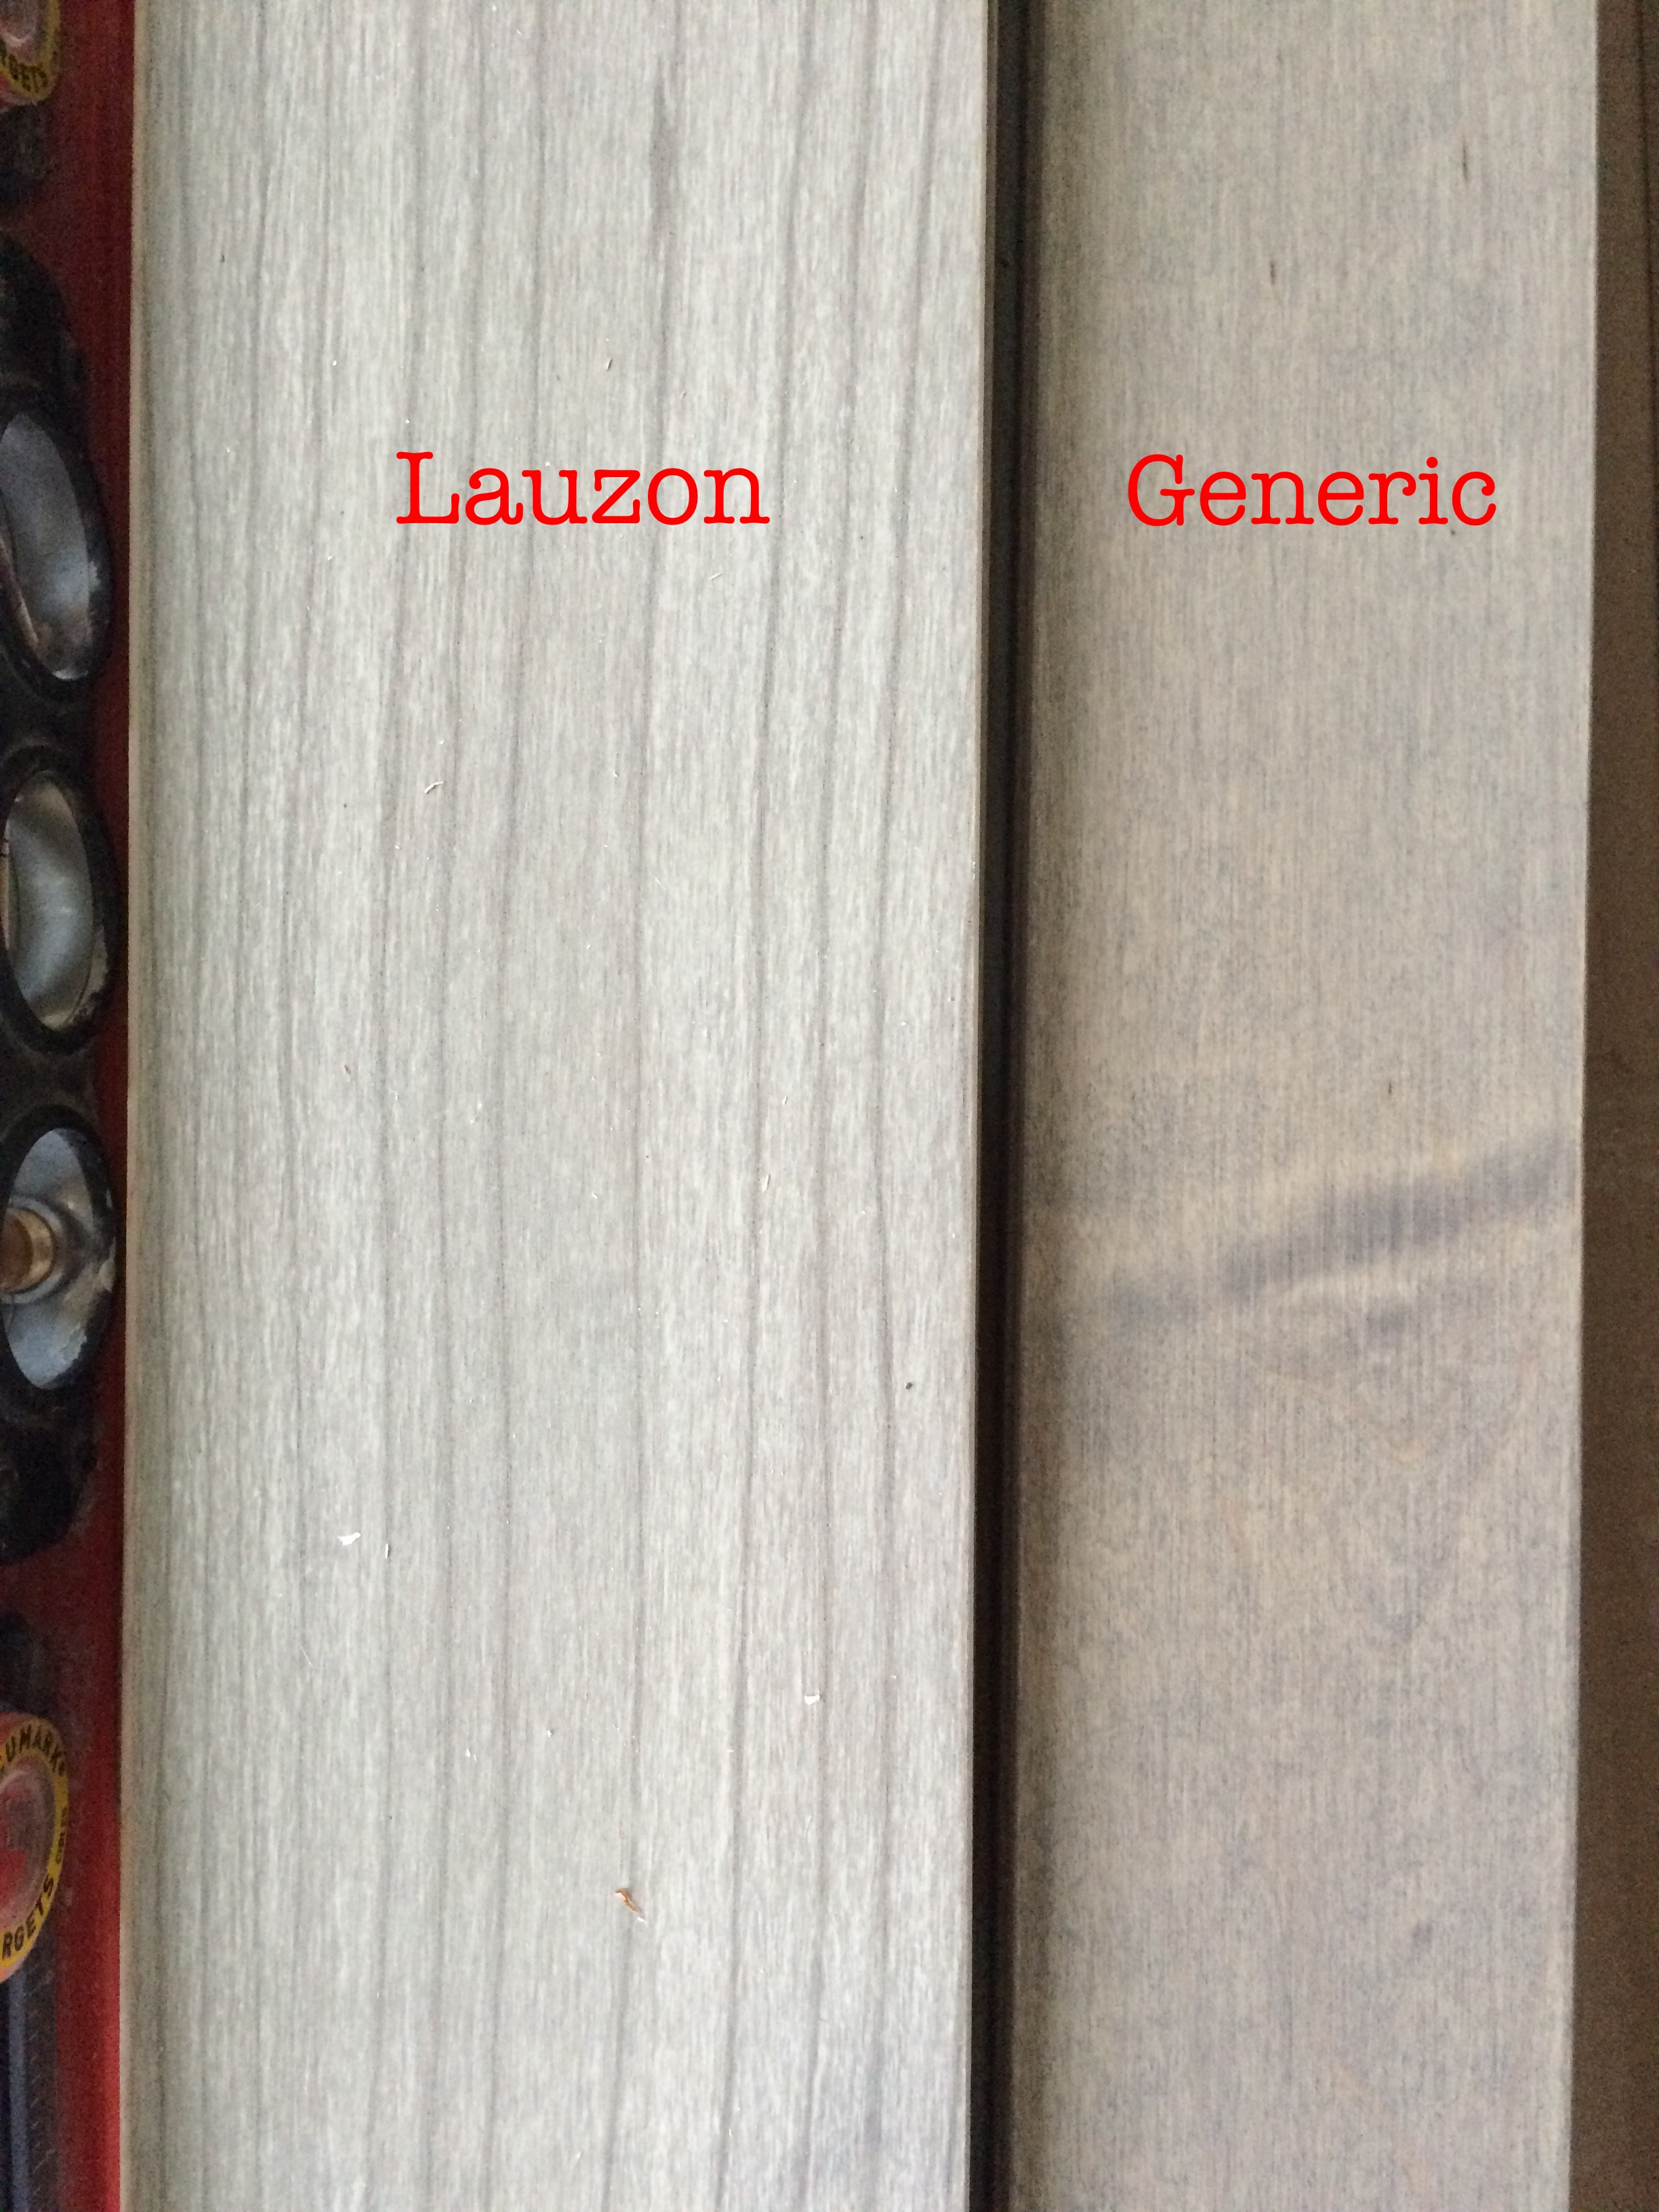 Difference of the two hardwoods